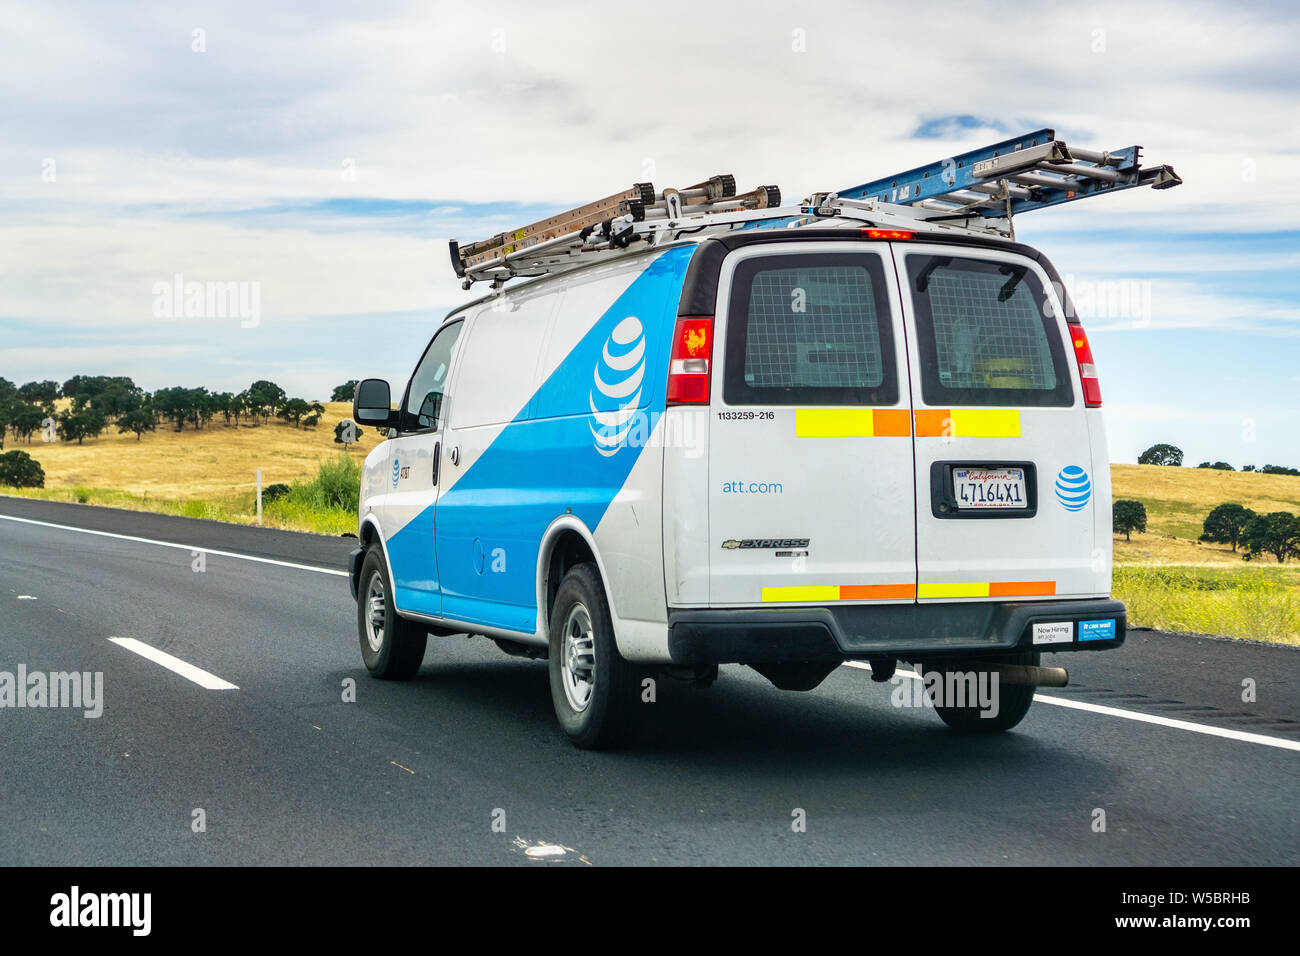 June 28, 2019 Oakdale / CA / USA - AT&T service van driving on the freeway; emblem displayed on the side Stock Photo